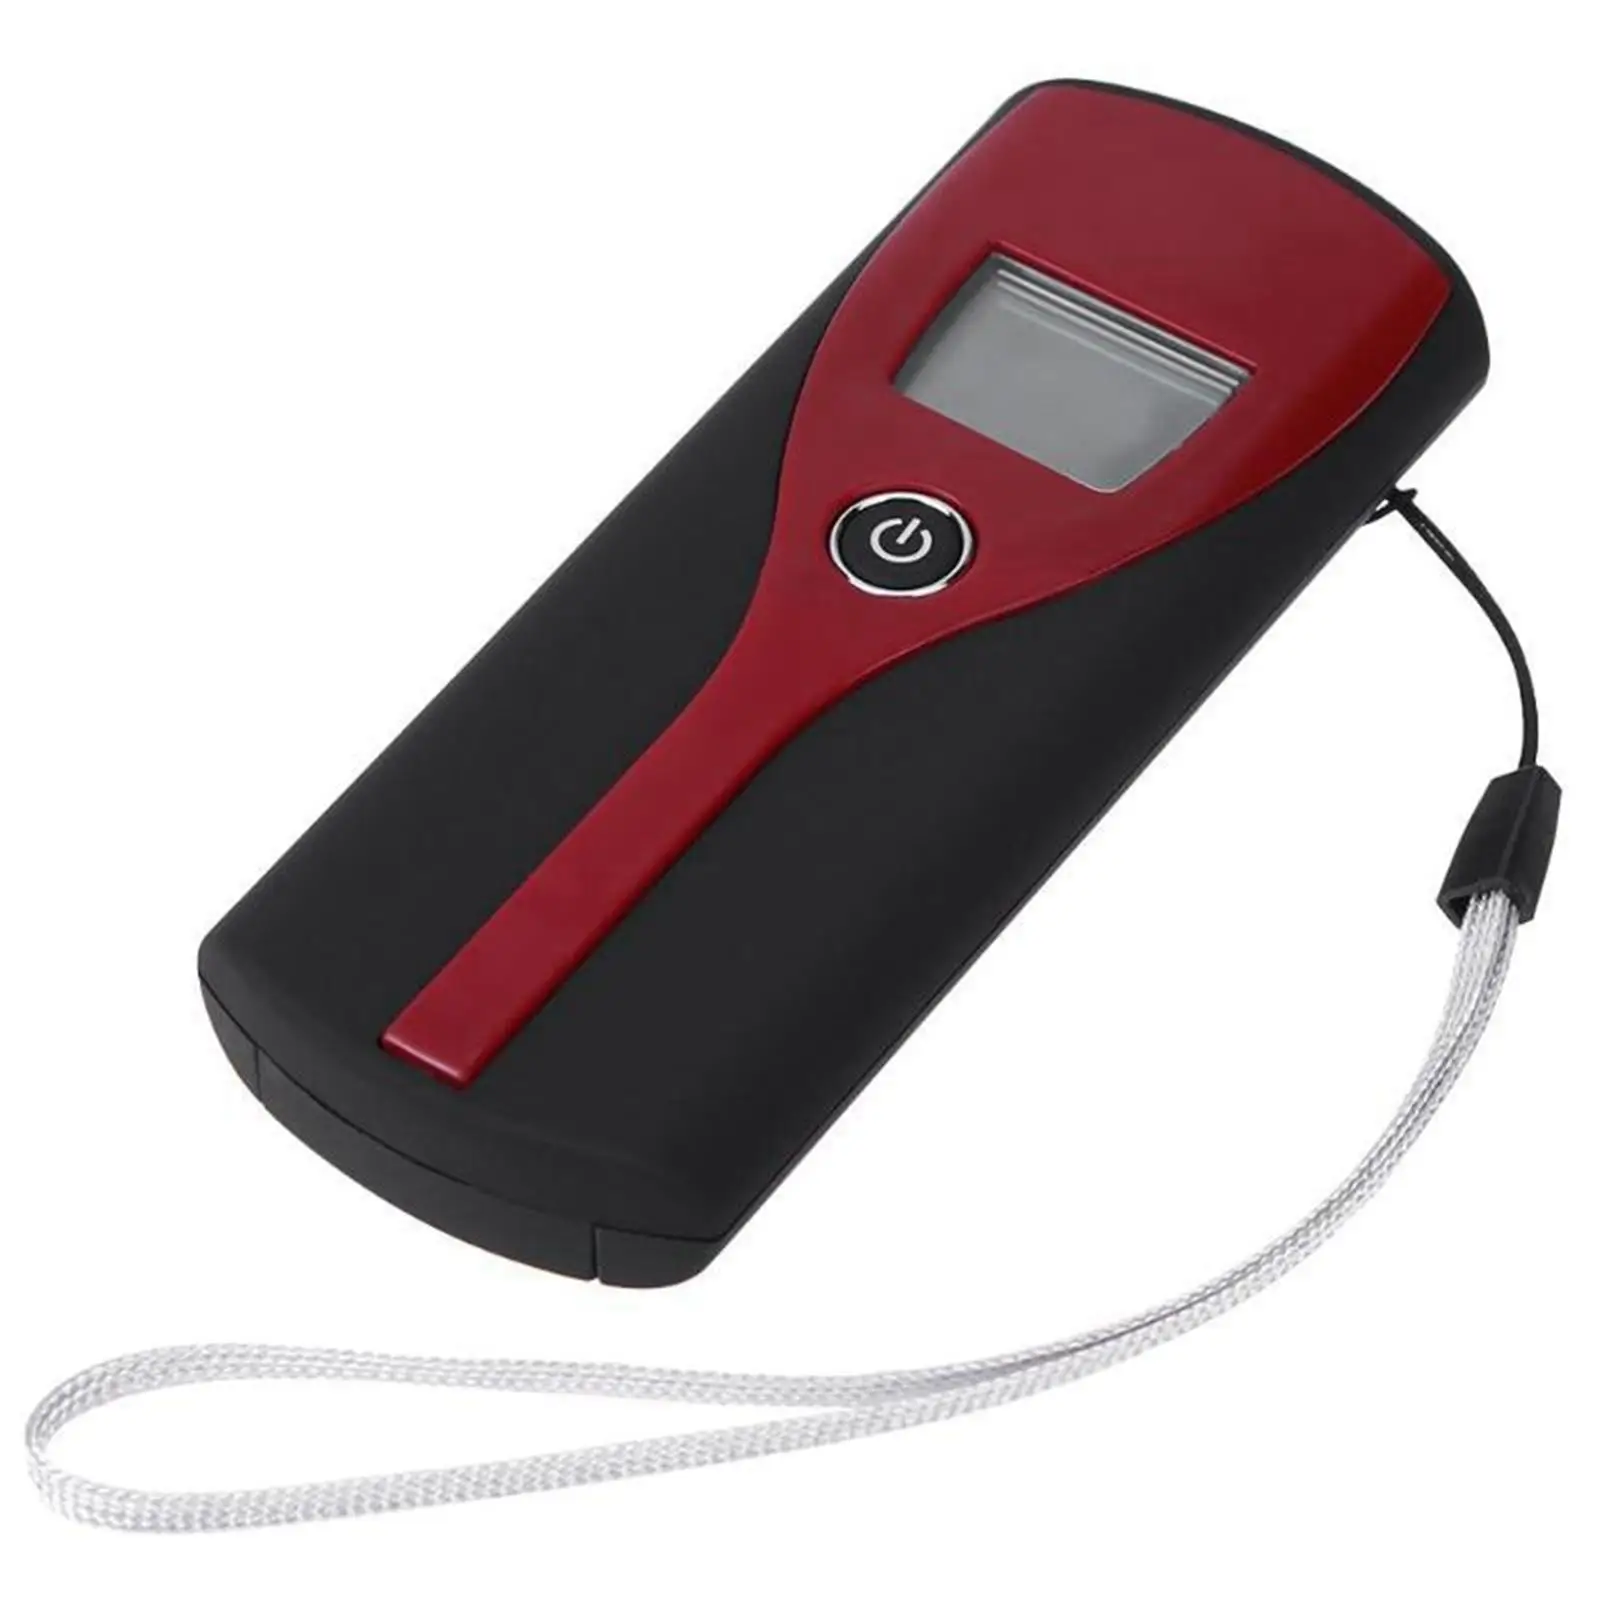 Sensor Breath   Detector, , with Digital LCD Screen, Non--Accuracy Fast Portable for Home Use